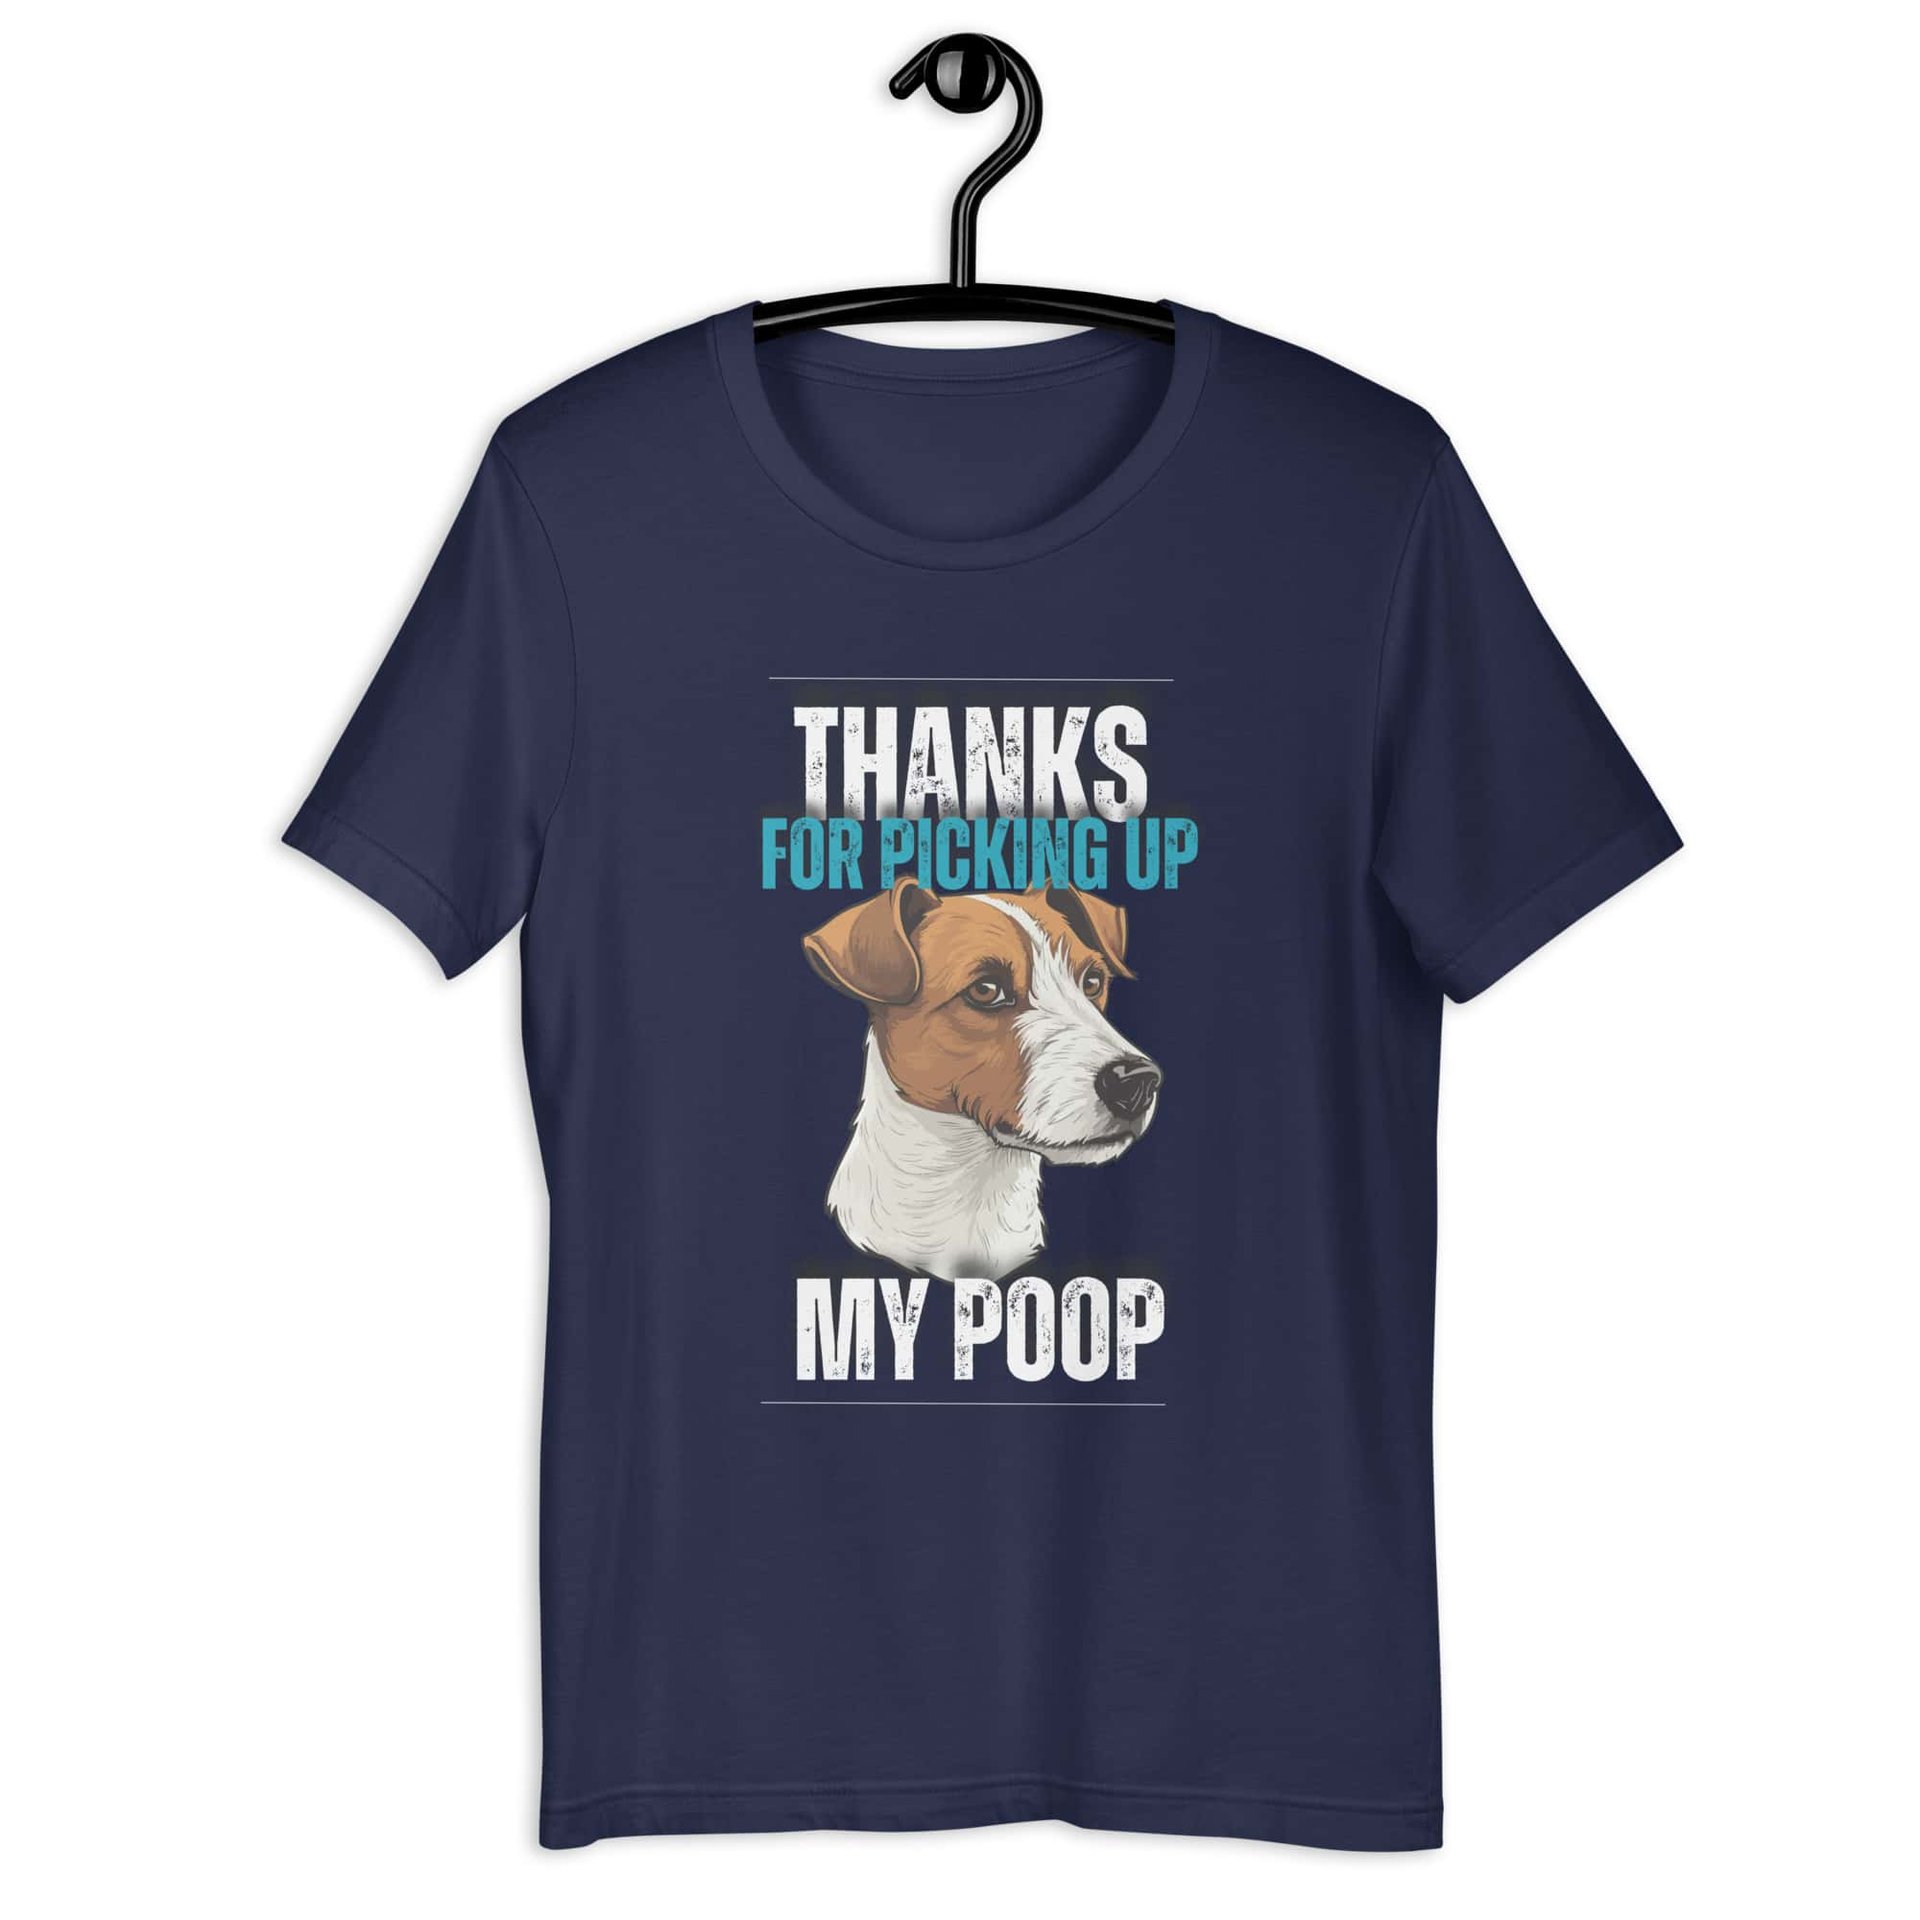 Thanks For Picking Up My POOP Funny Retrievers Unisex T-Shirt. Navy